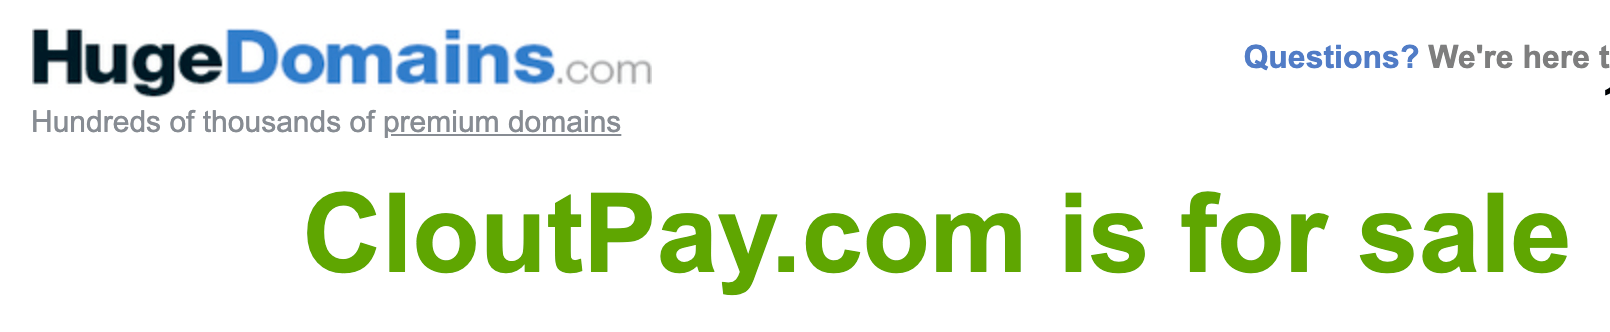 clout-pay-domain-on-sale